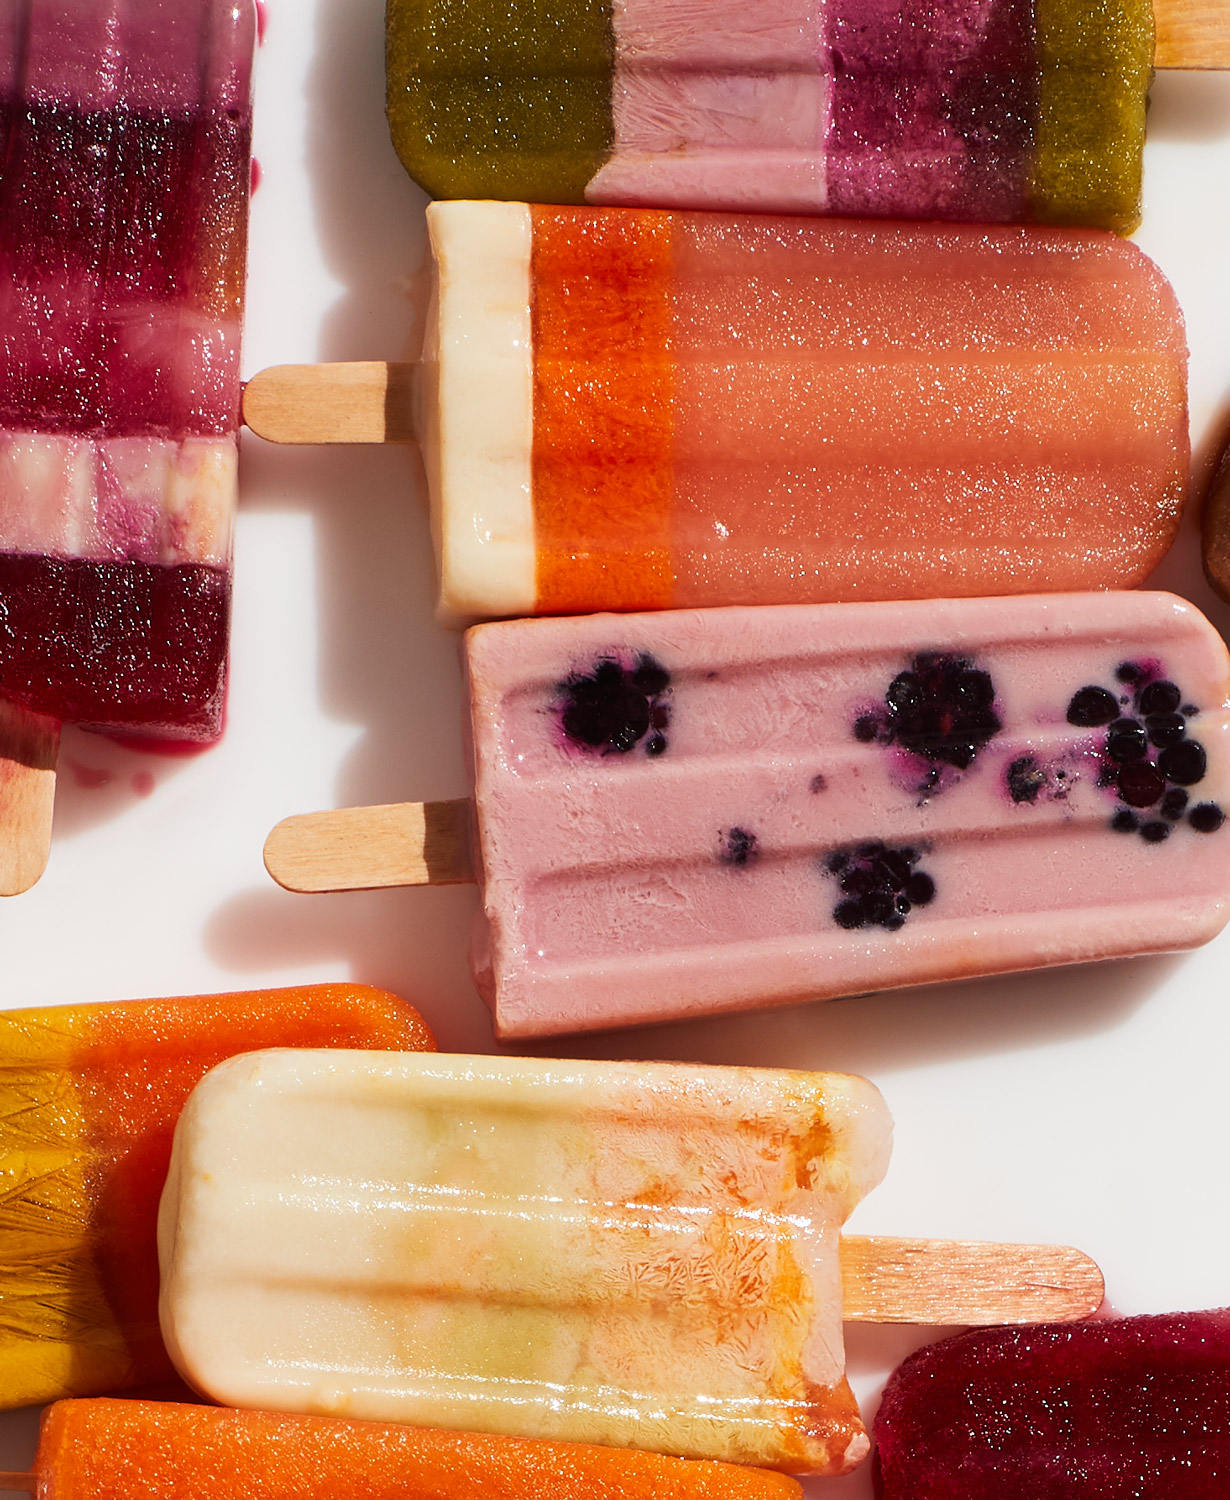 Food: Popsicles